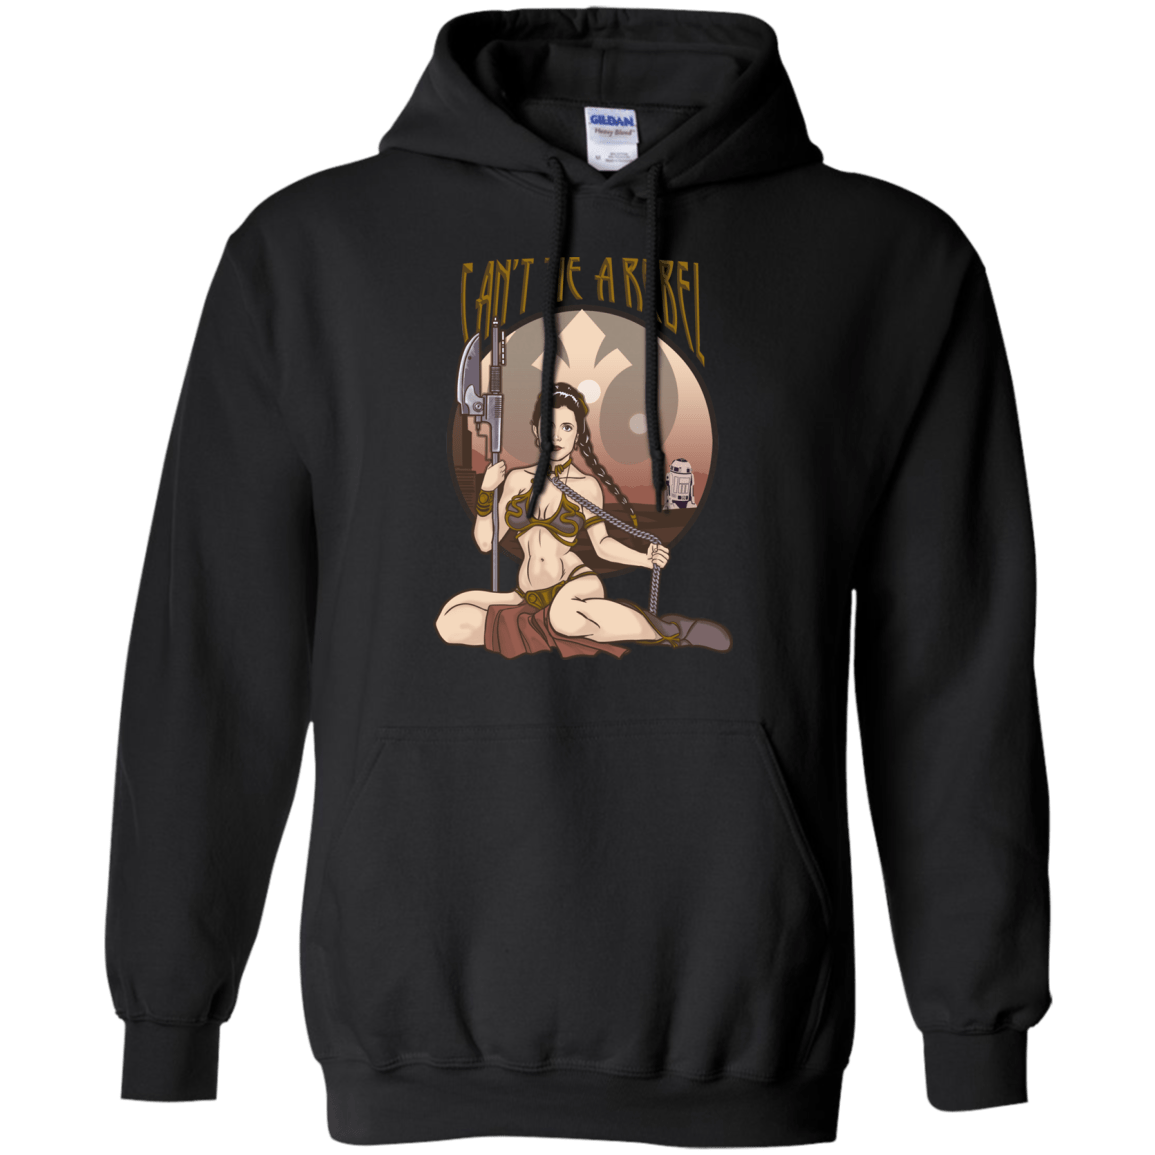 Sweatshirts Black / Small Can't Tie a Rebel Pullover Hoodie